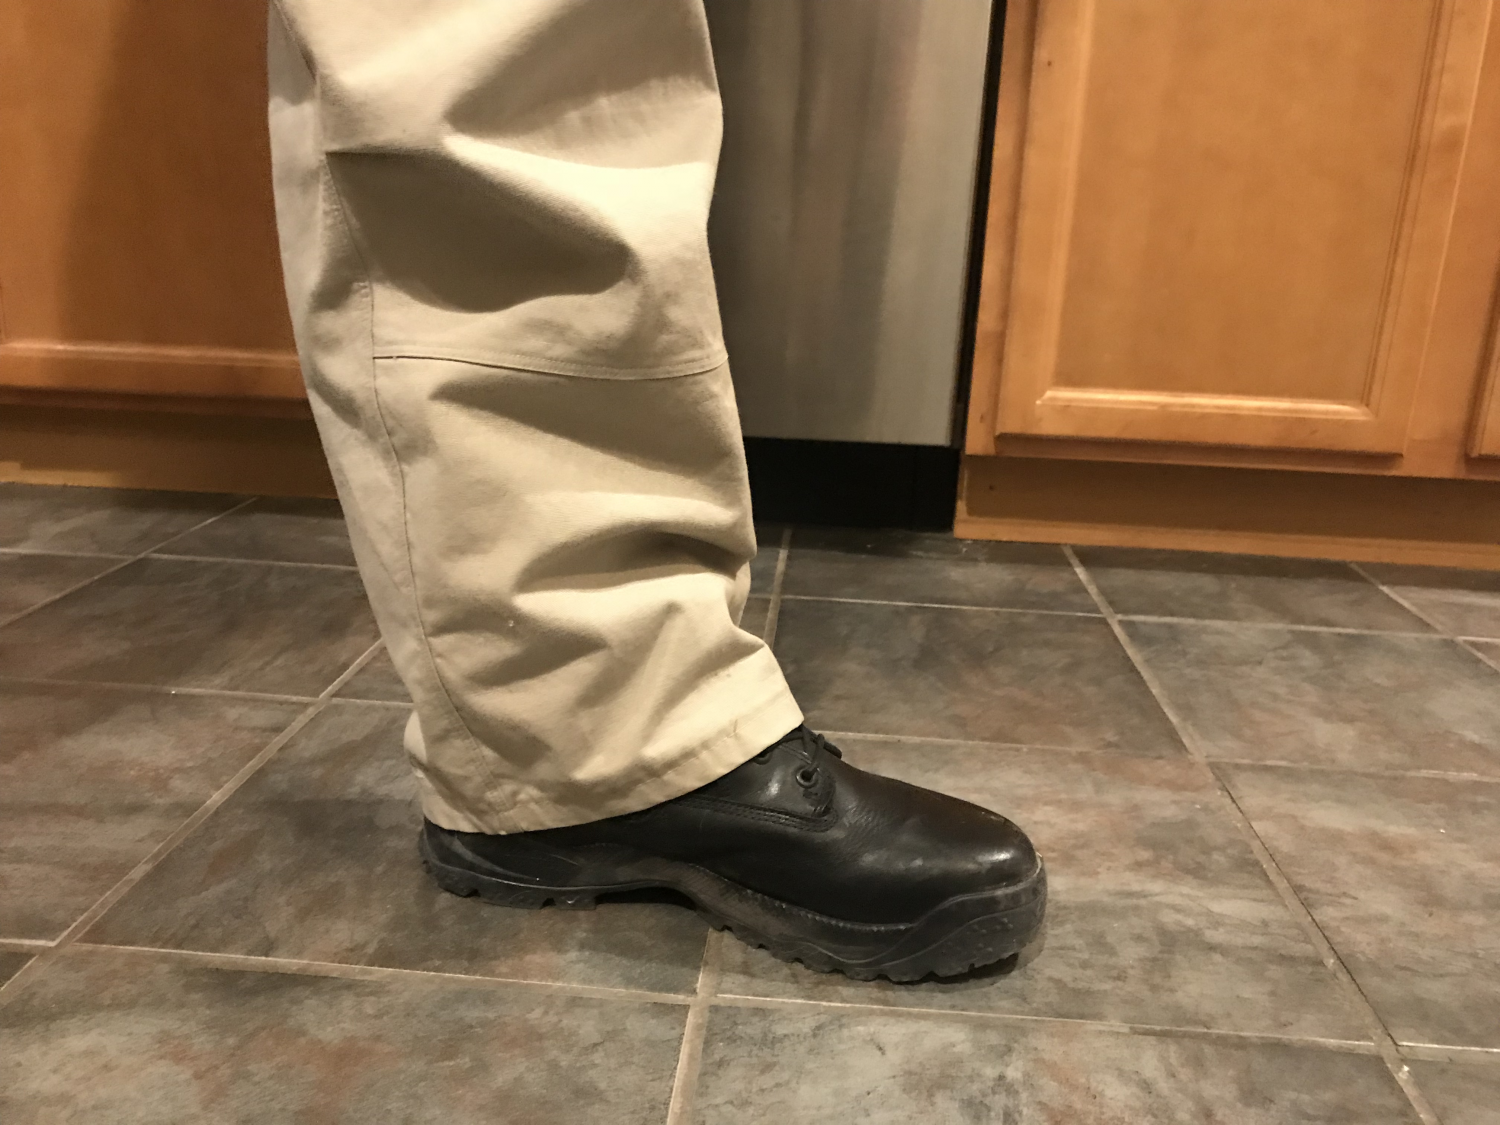 The Alien Gear ShapeShift Ankle Holster conceals very well under my Vertx Phantom duty pants.